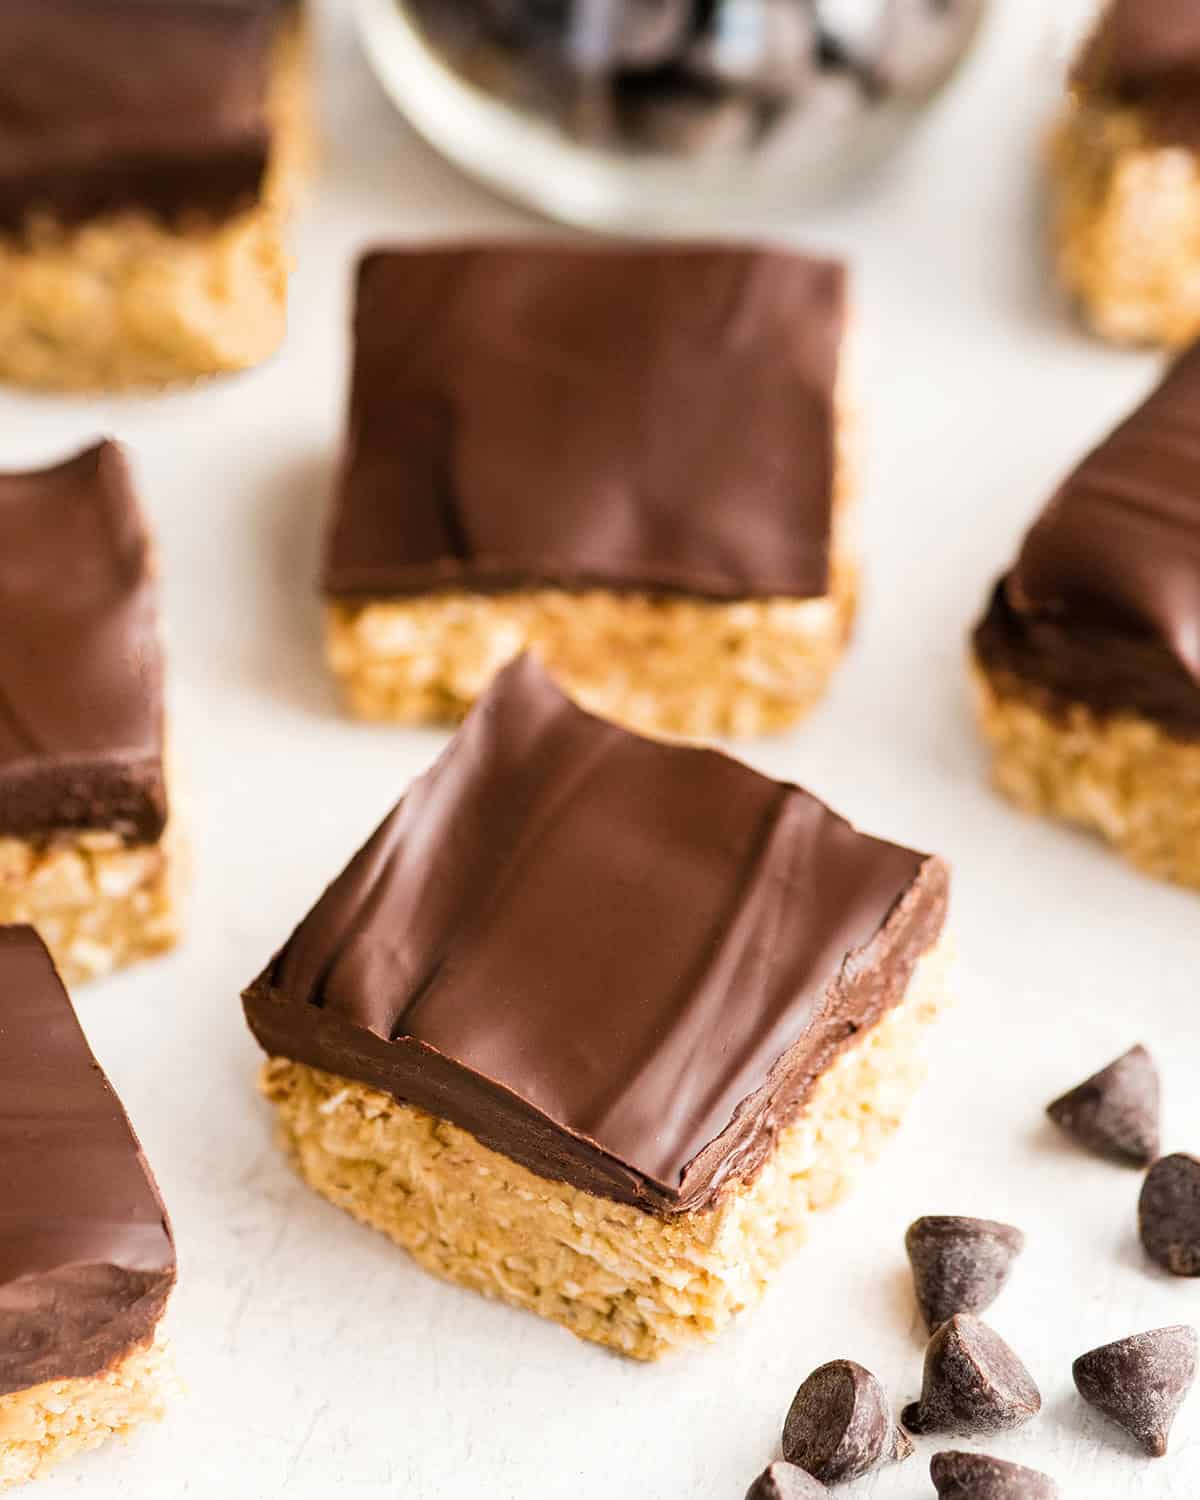 7 No Bake Oatmeal Bars with peanut butter and chocolate topping